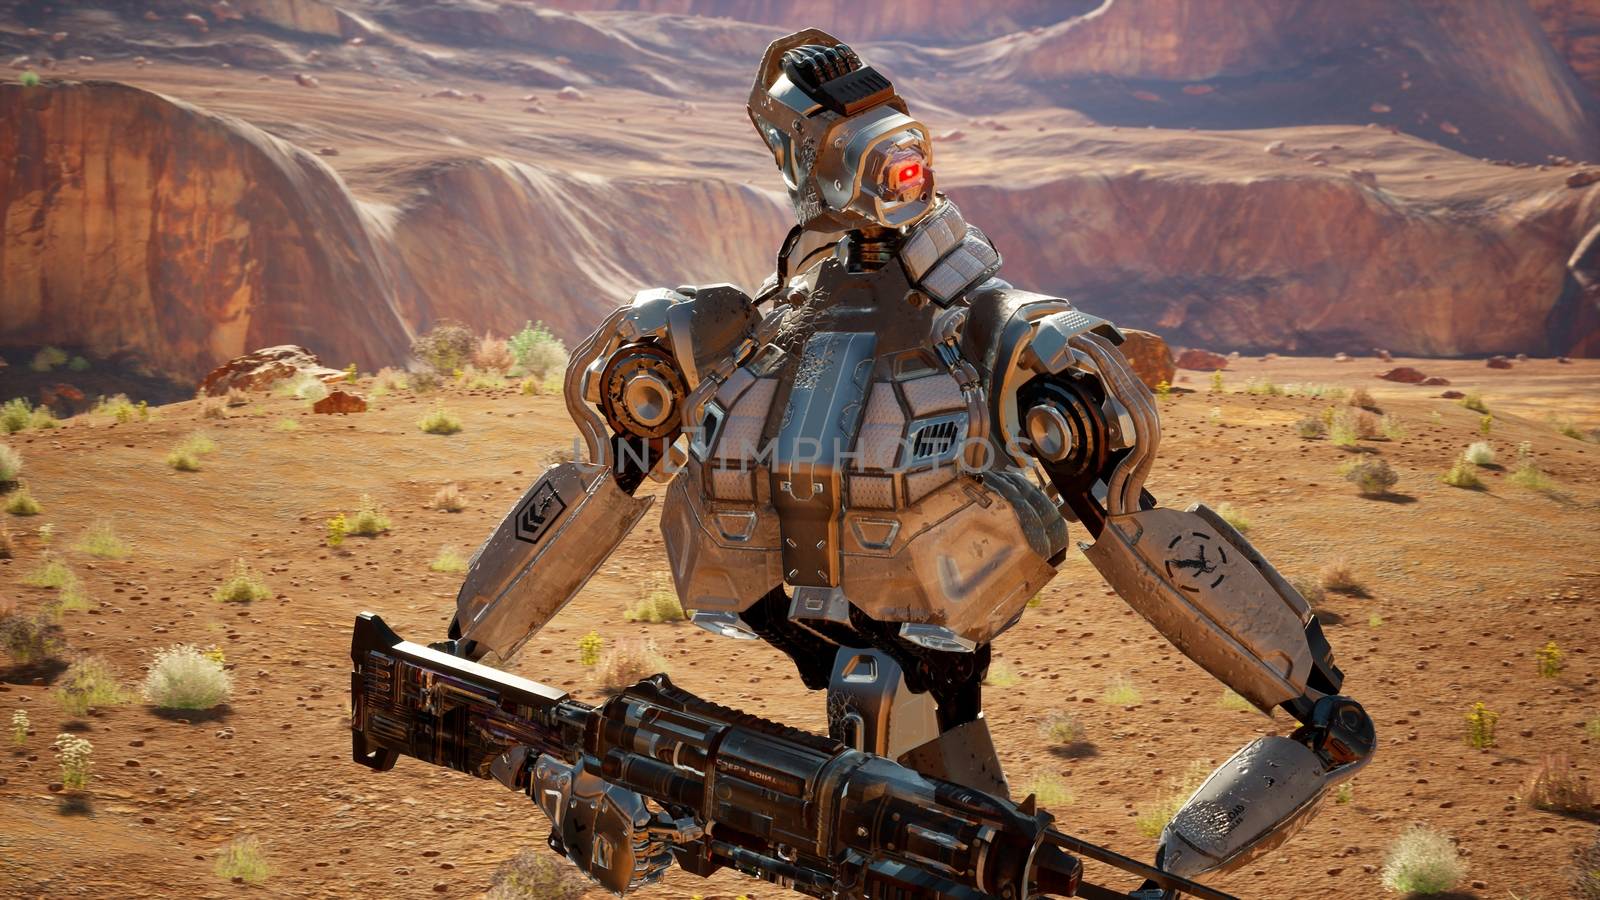 Military robot-android in the desert surveys the territory.